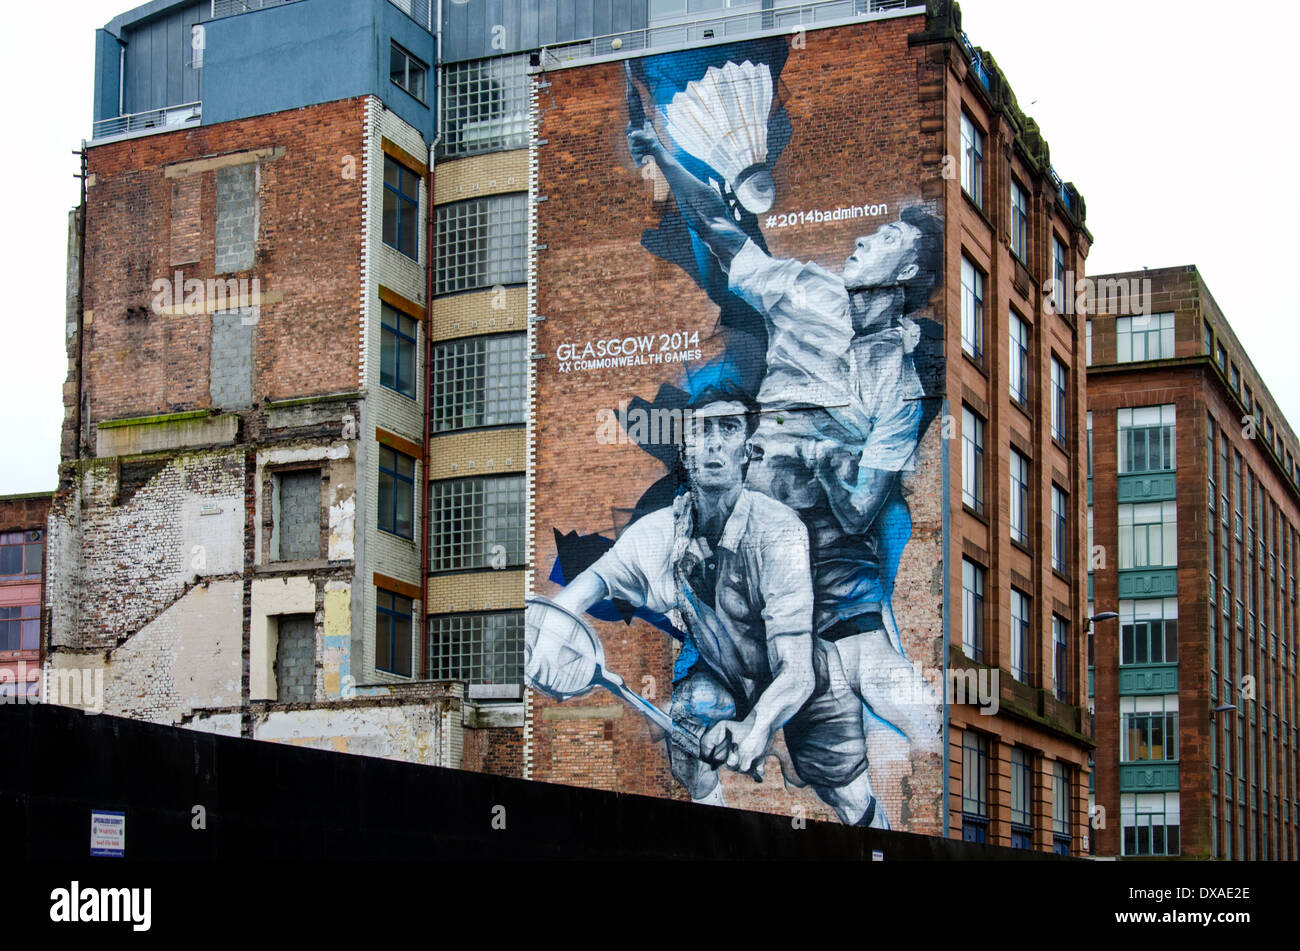 Mural by Guido van Helten depicting two badminton players on a building in Candleriggs area of Glasgow, created for the 2014 Commonwealth Games. Stock Photo